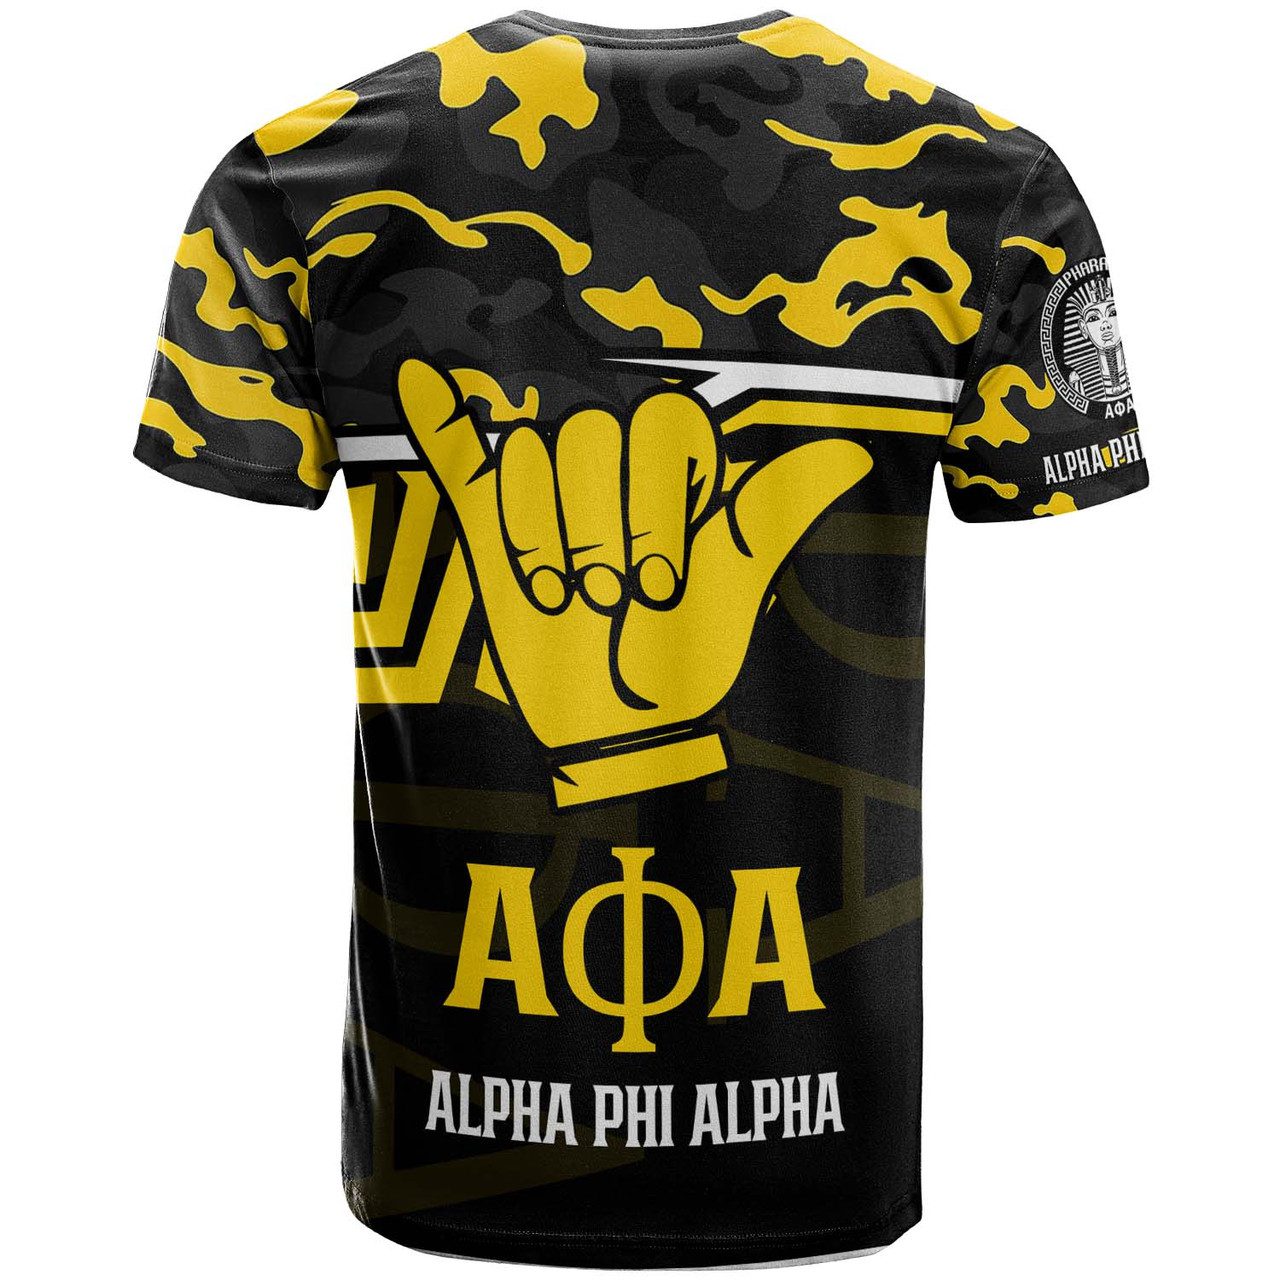 Alpha Phi Alpha T-shirt – Fraternity Alpha Phi Alpha Hand Sign with Camouflage Pattern T-shirt